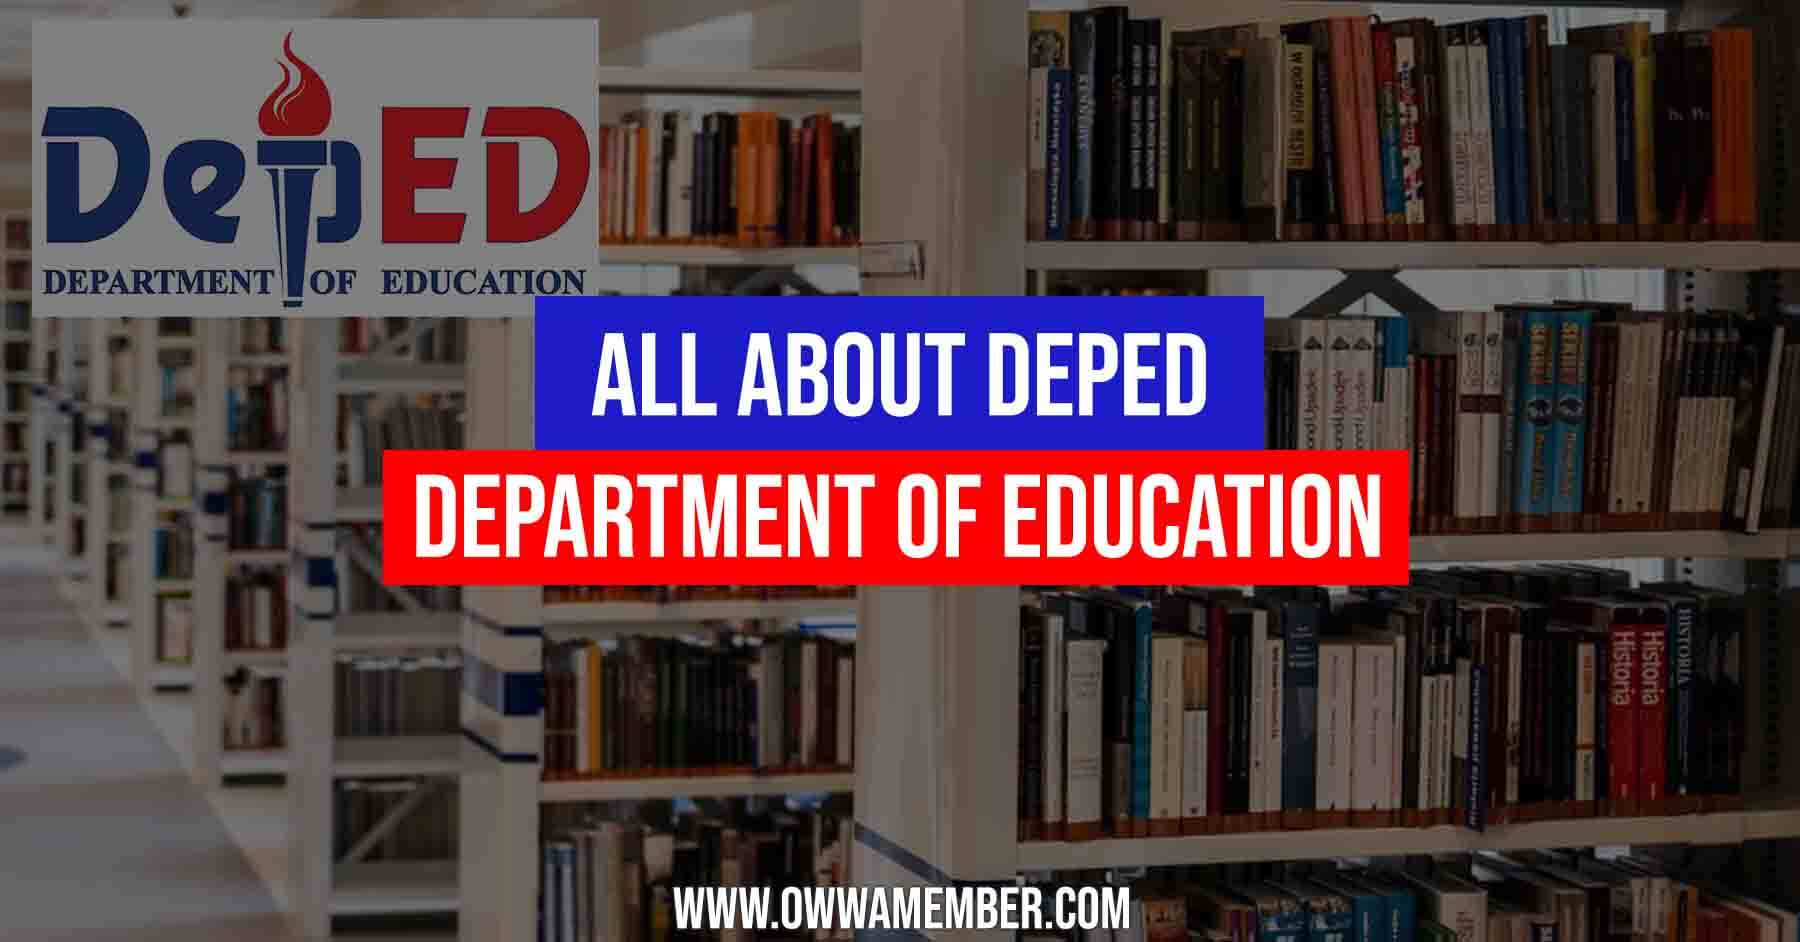 deped department of education philippines